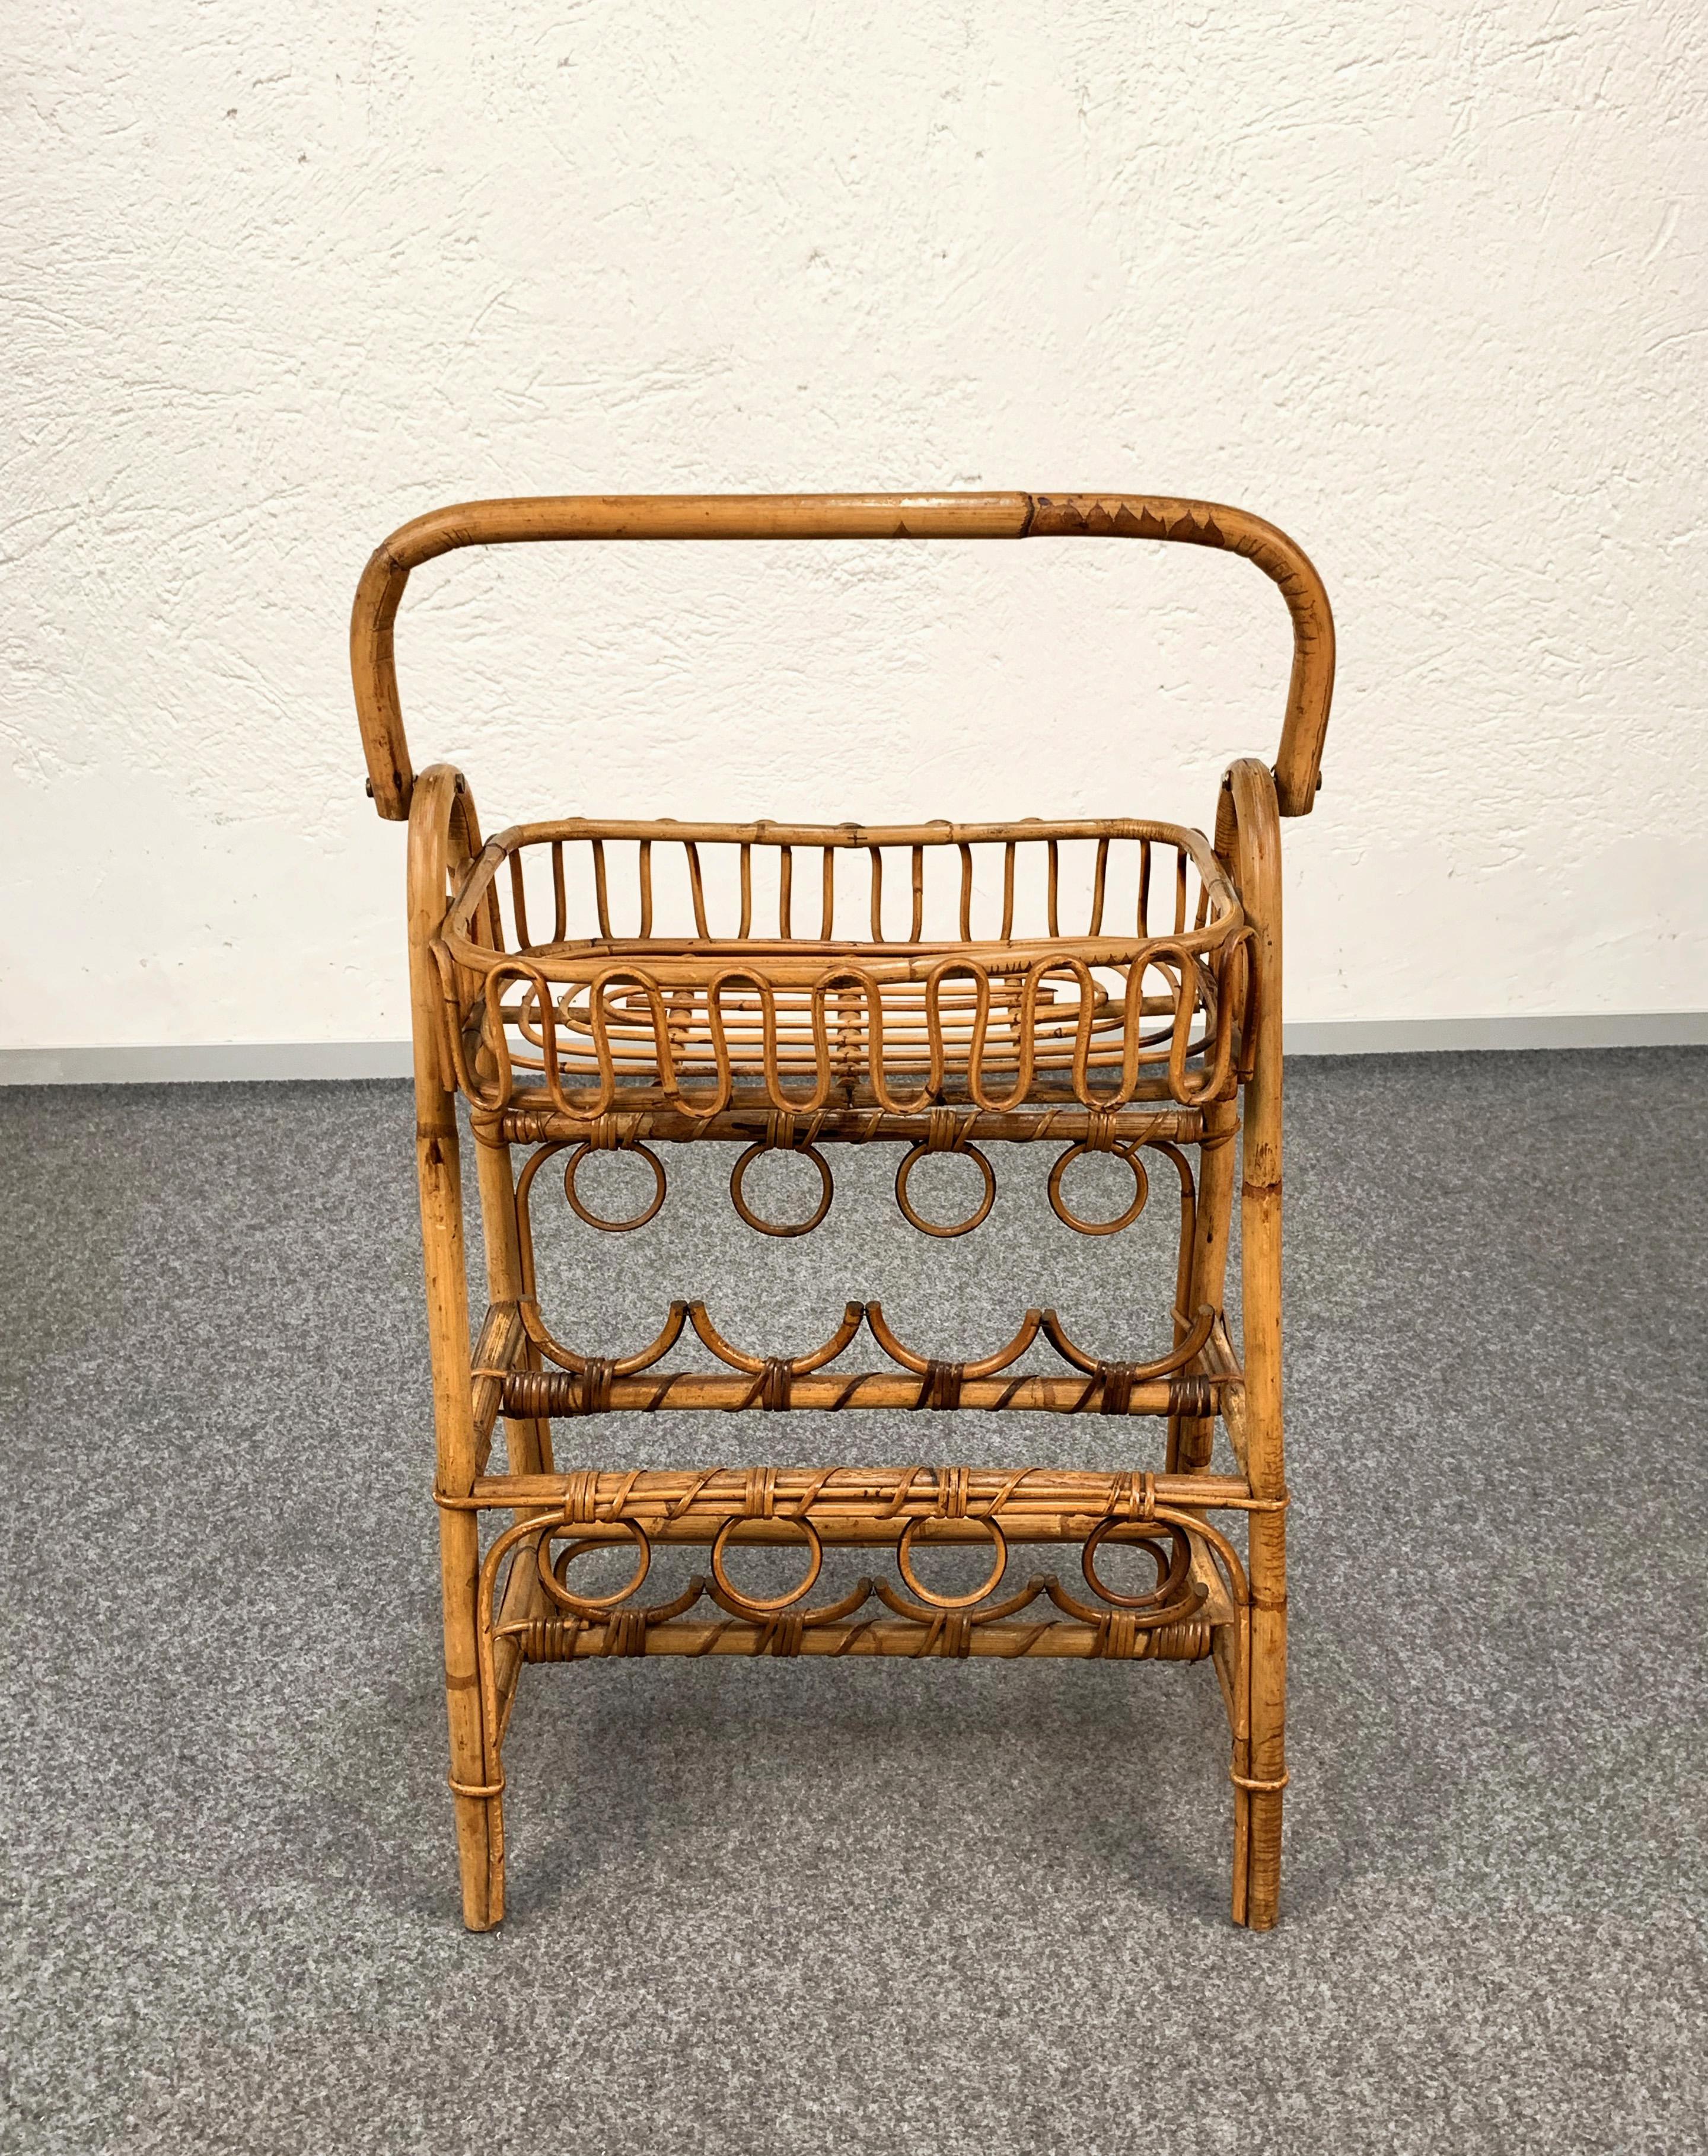 A very elegant and beautiful service table with bottle holder. This item is made of bamboo and rattan and has two floors, the top one it's a side table while the lower one is a bottle holder. 

It is a midcentury Italian production from the 1960s.